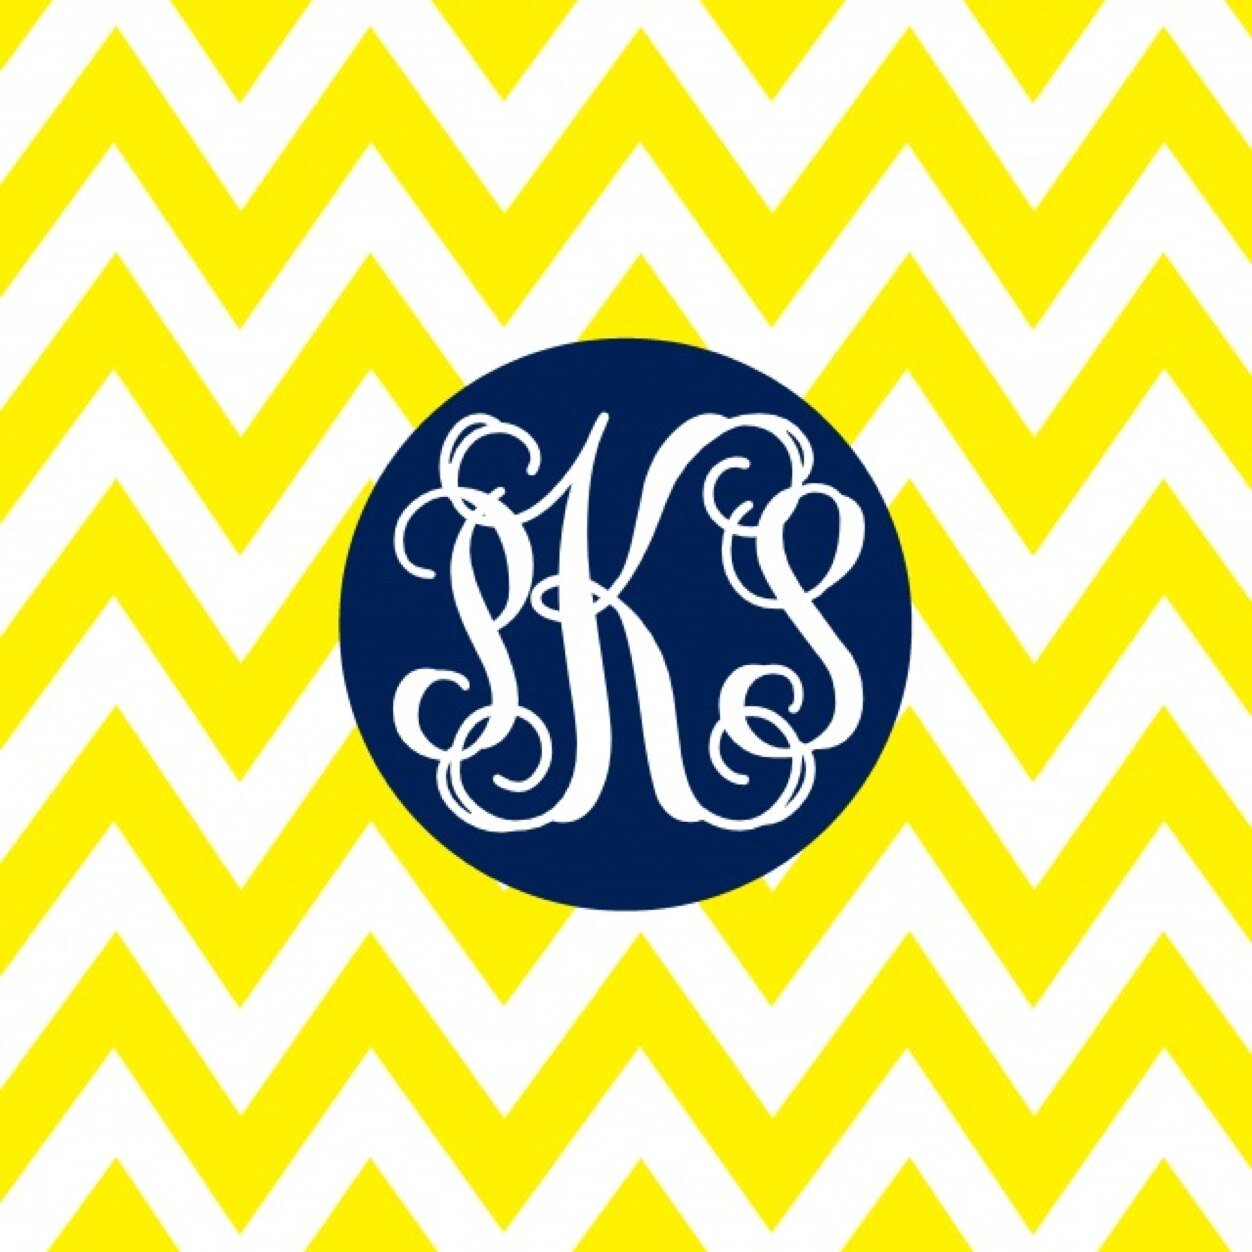 southern belle who loves her monograms✨ DM for a personalized monogram wallpaper